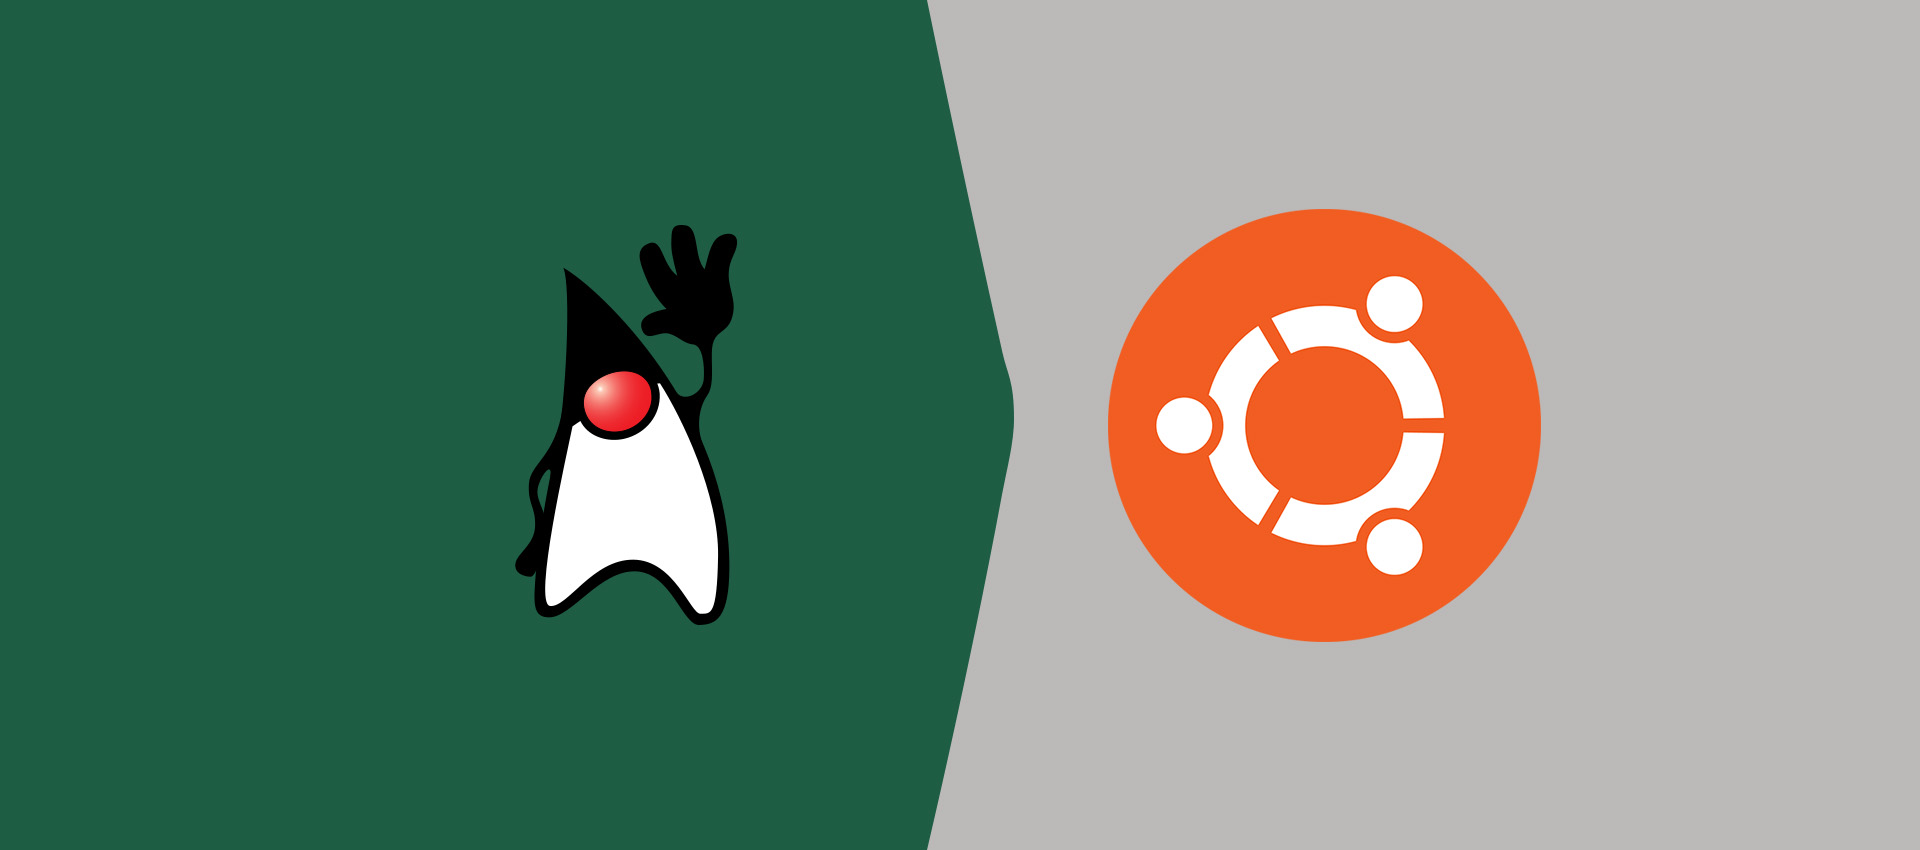 How To Install OpenJDK 15 On Ubuntu 20.04 LTS